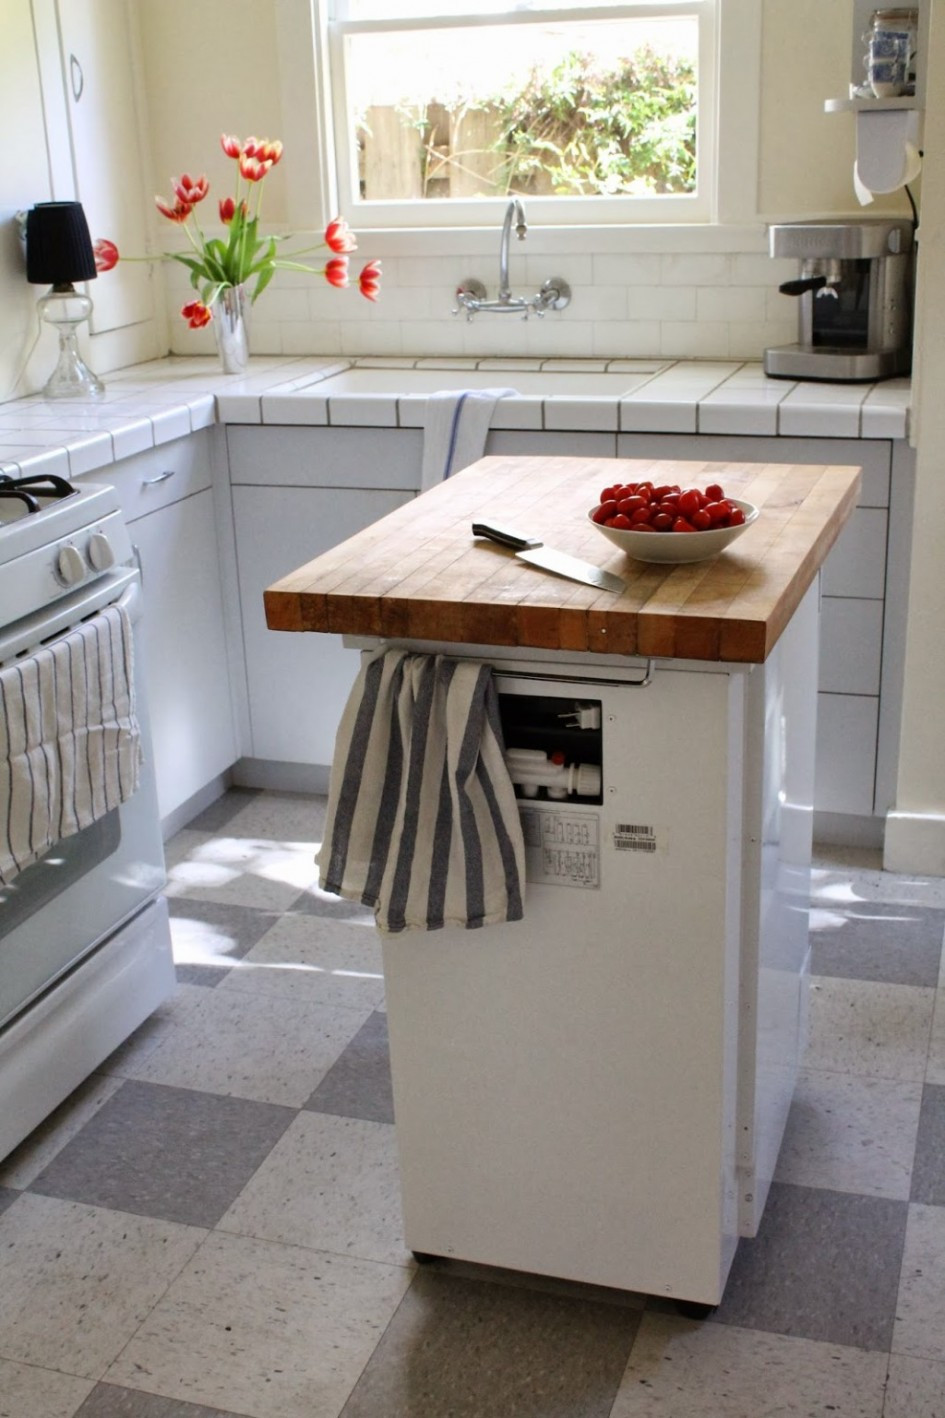 Small Kitchen Stand
 5 Inexpensive Ways to Make Your Small Kitchen More Functional